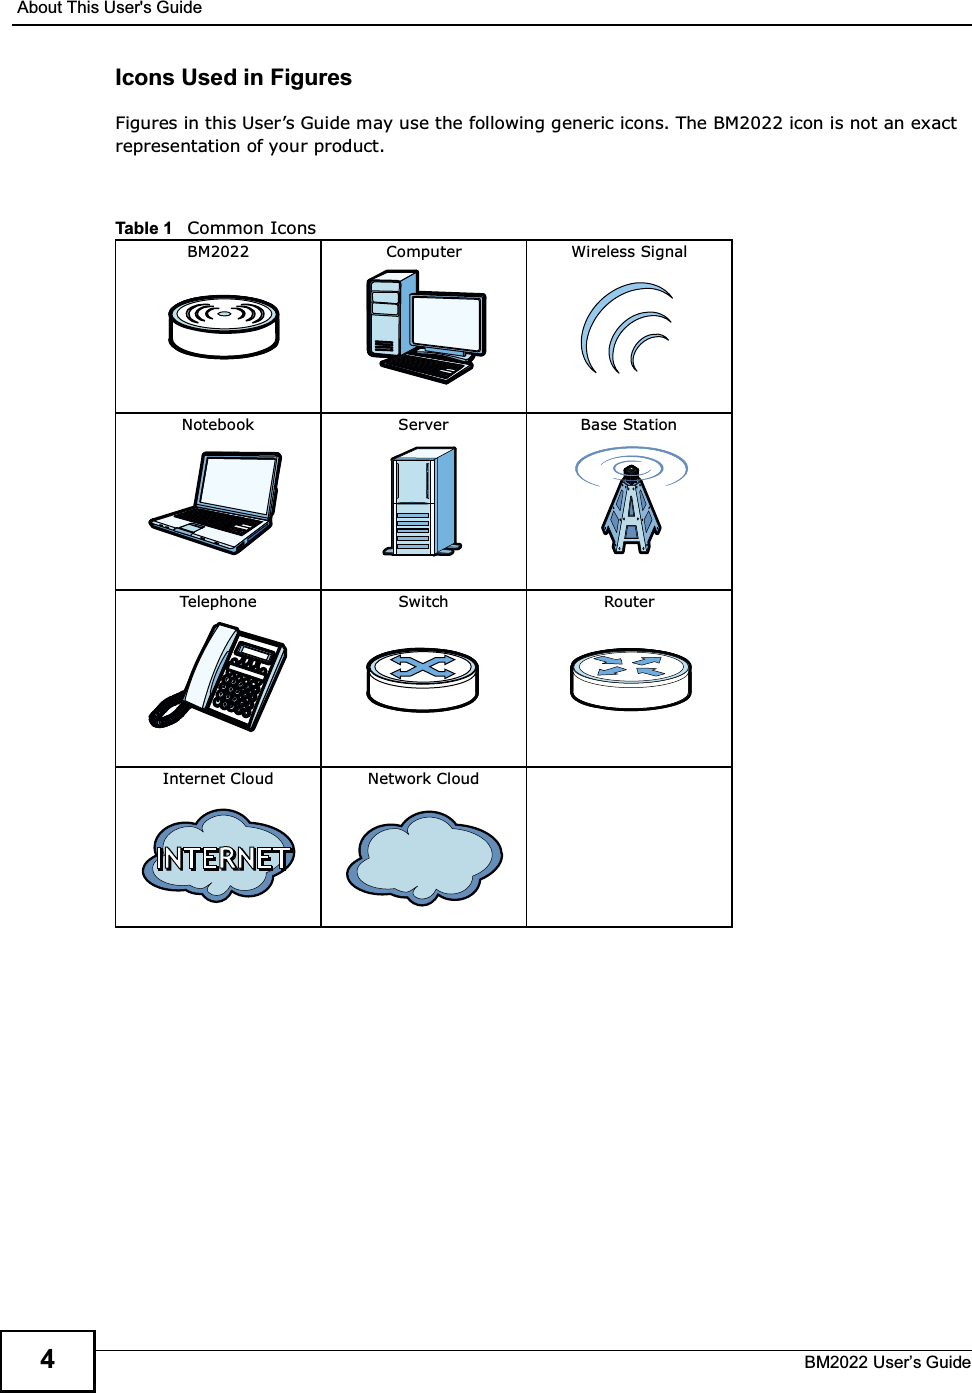 About This User&apos;s GuideBM2022 Users Guide4Icons Used in FiguresFigures in this Users Guide may use the following generic icons. The BM2022 icon is not an exact representation of your product.Table 1   Common IconsBM2022 Computer Wireless SignalNotebook Server Base StationTelephone Switch RouterInternet Cloud Network Cloud